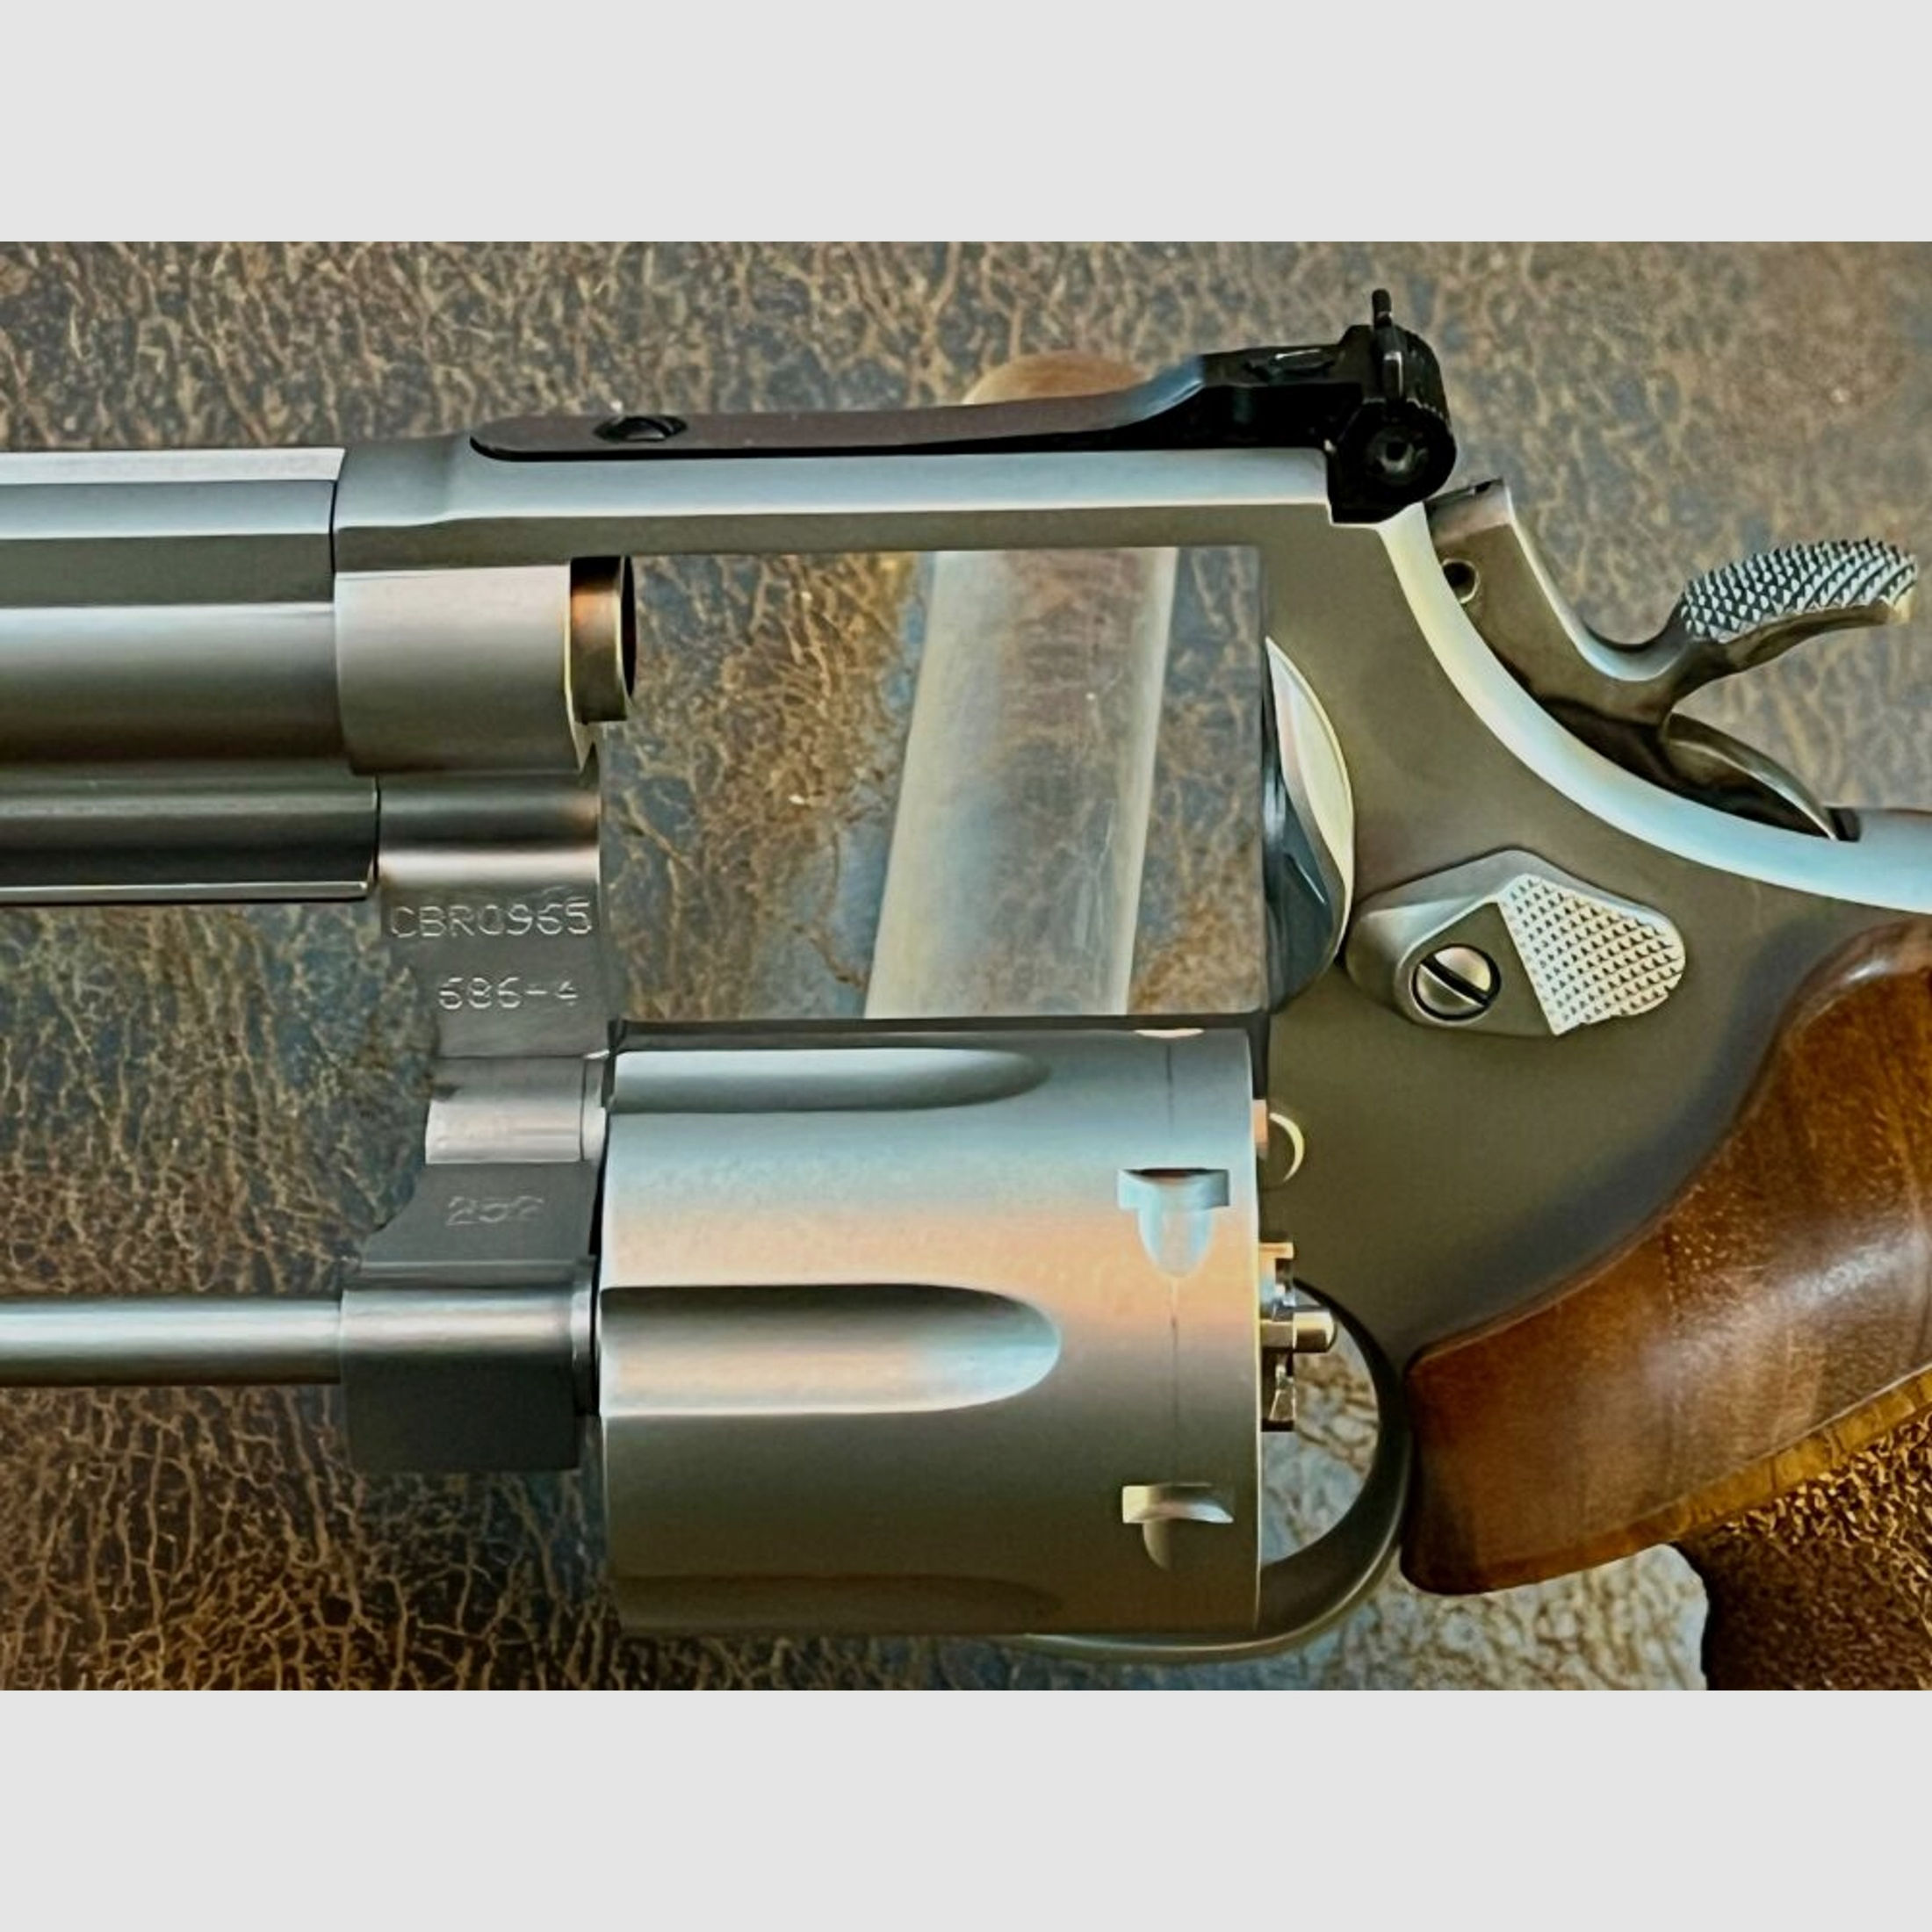 Smith & Wesson	 Mod. 686 Target Champion